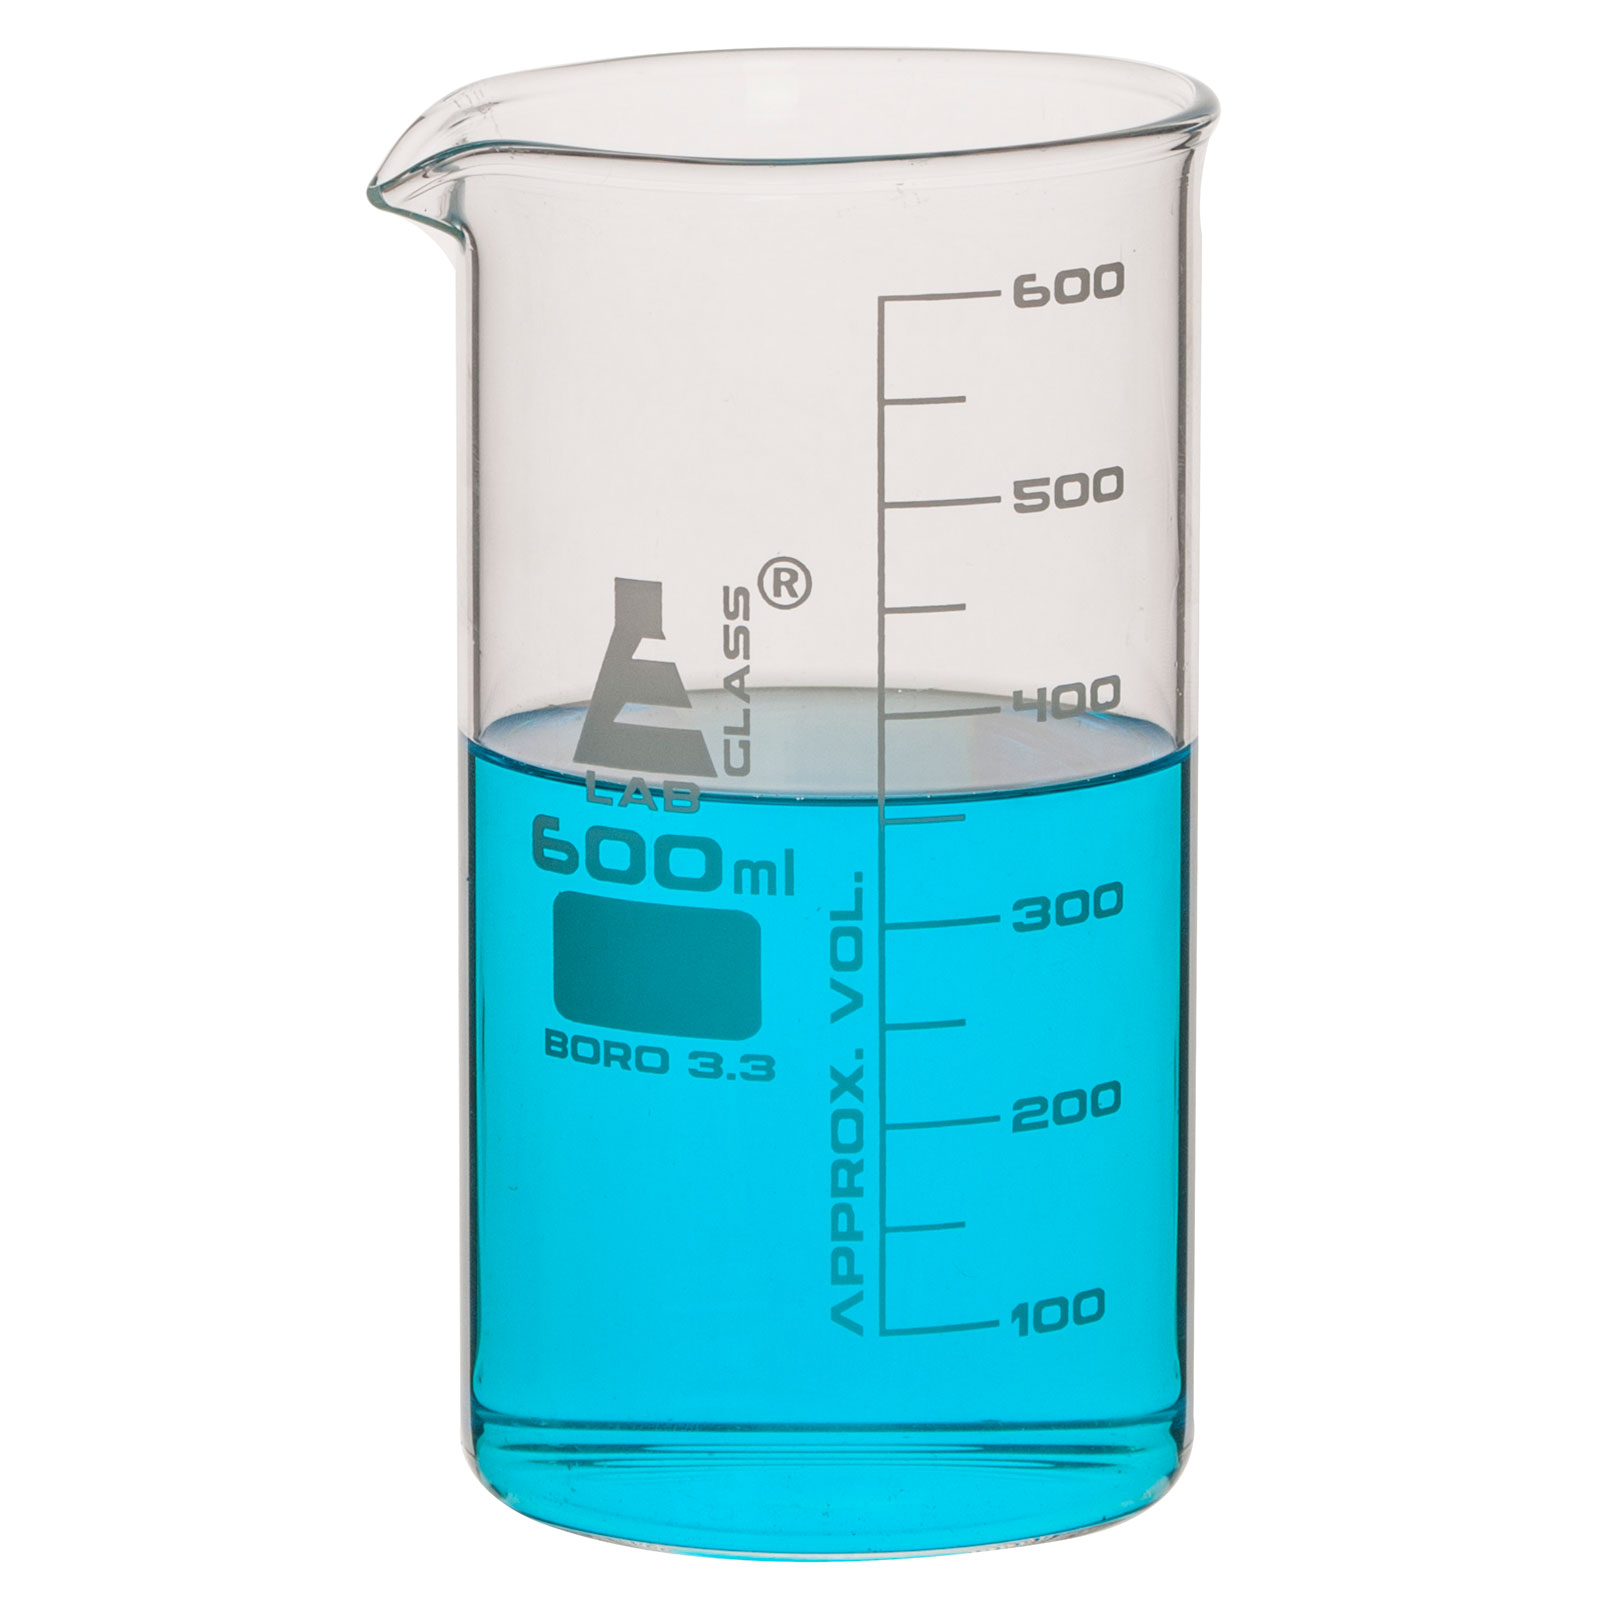 Labglass Tall Form Beaker With Spout Graduated 600ml Pack Of 6 Rapid Online 5838